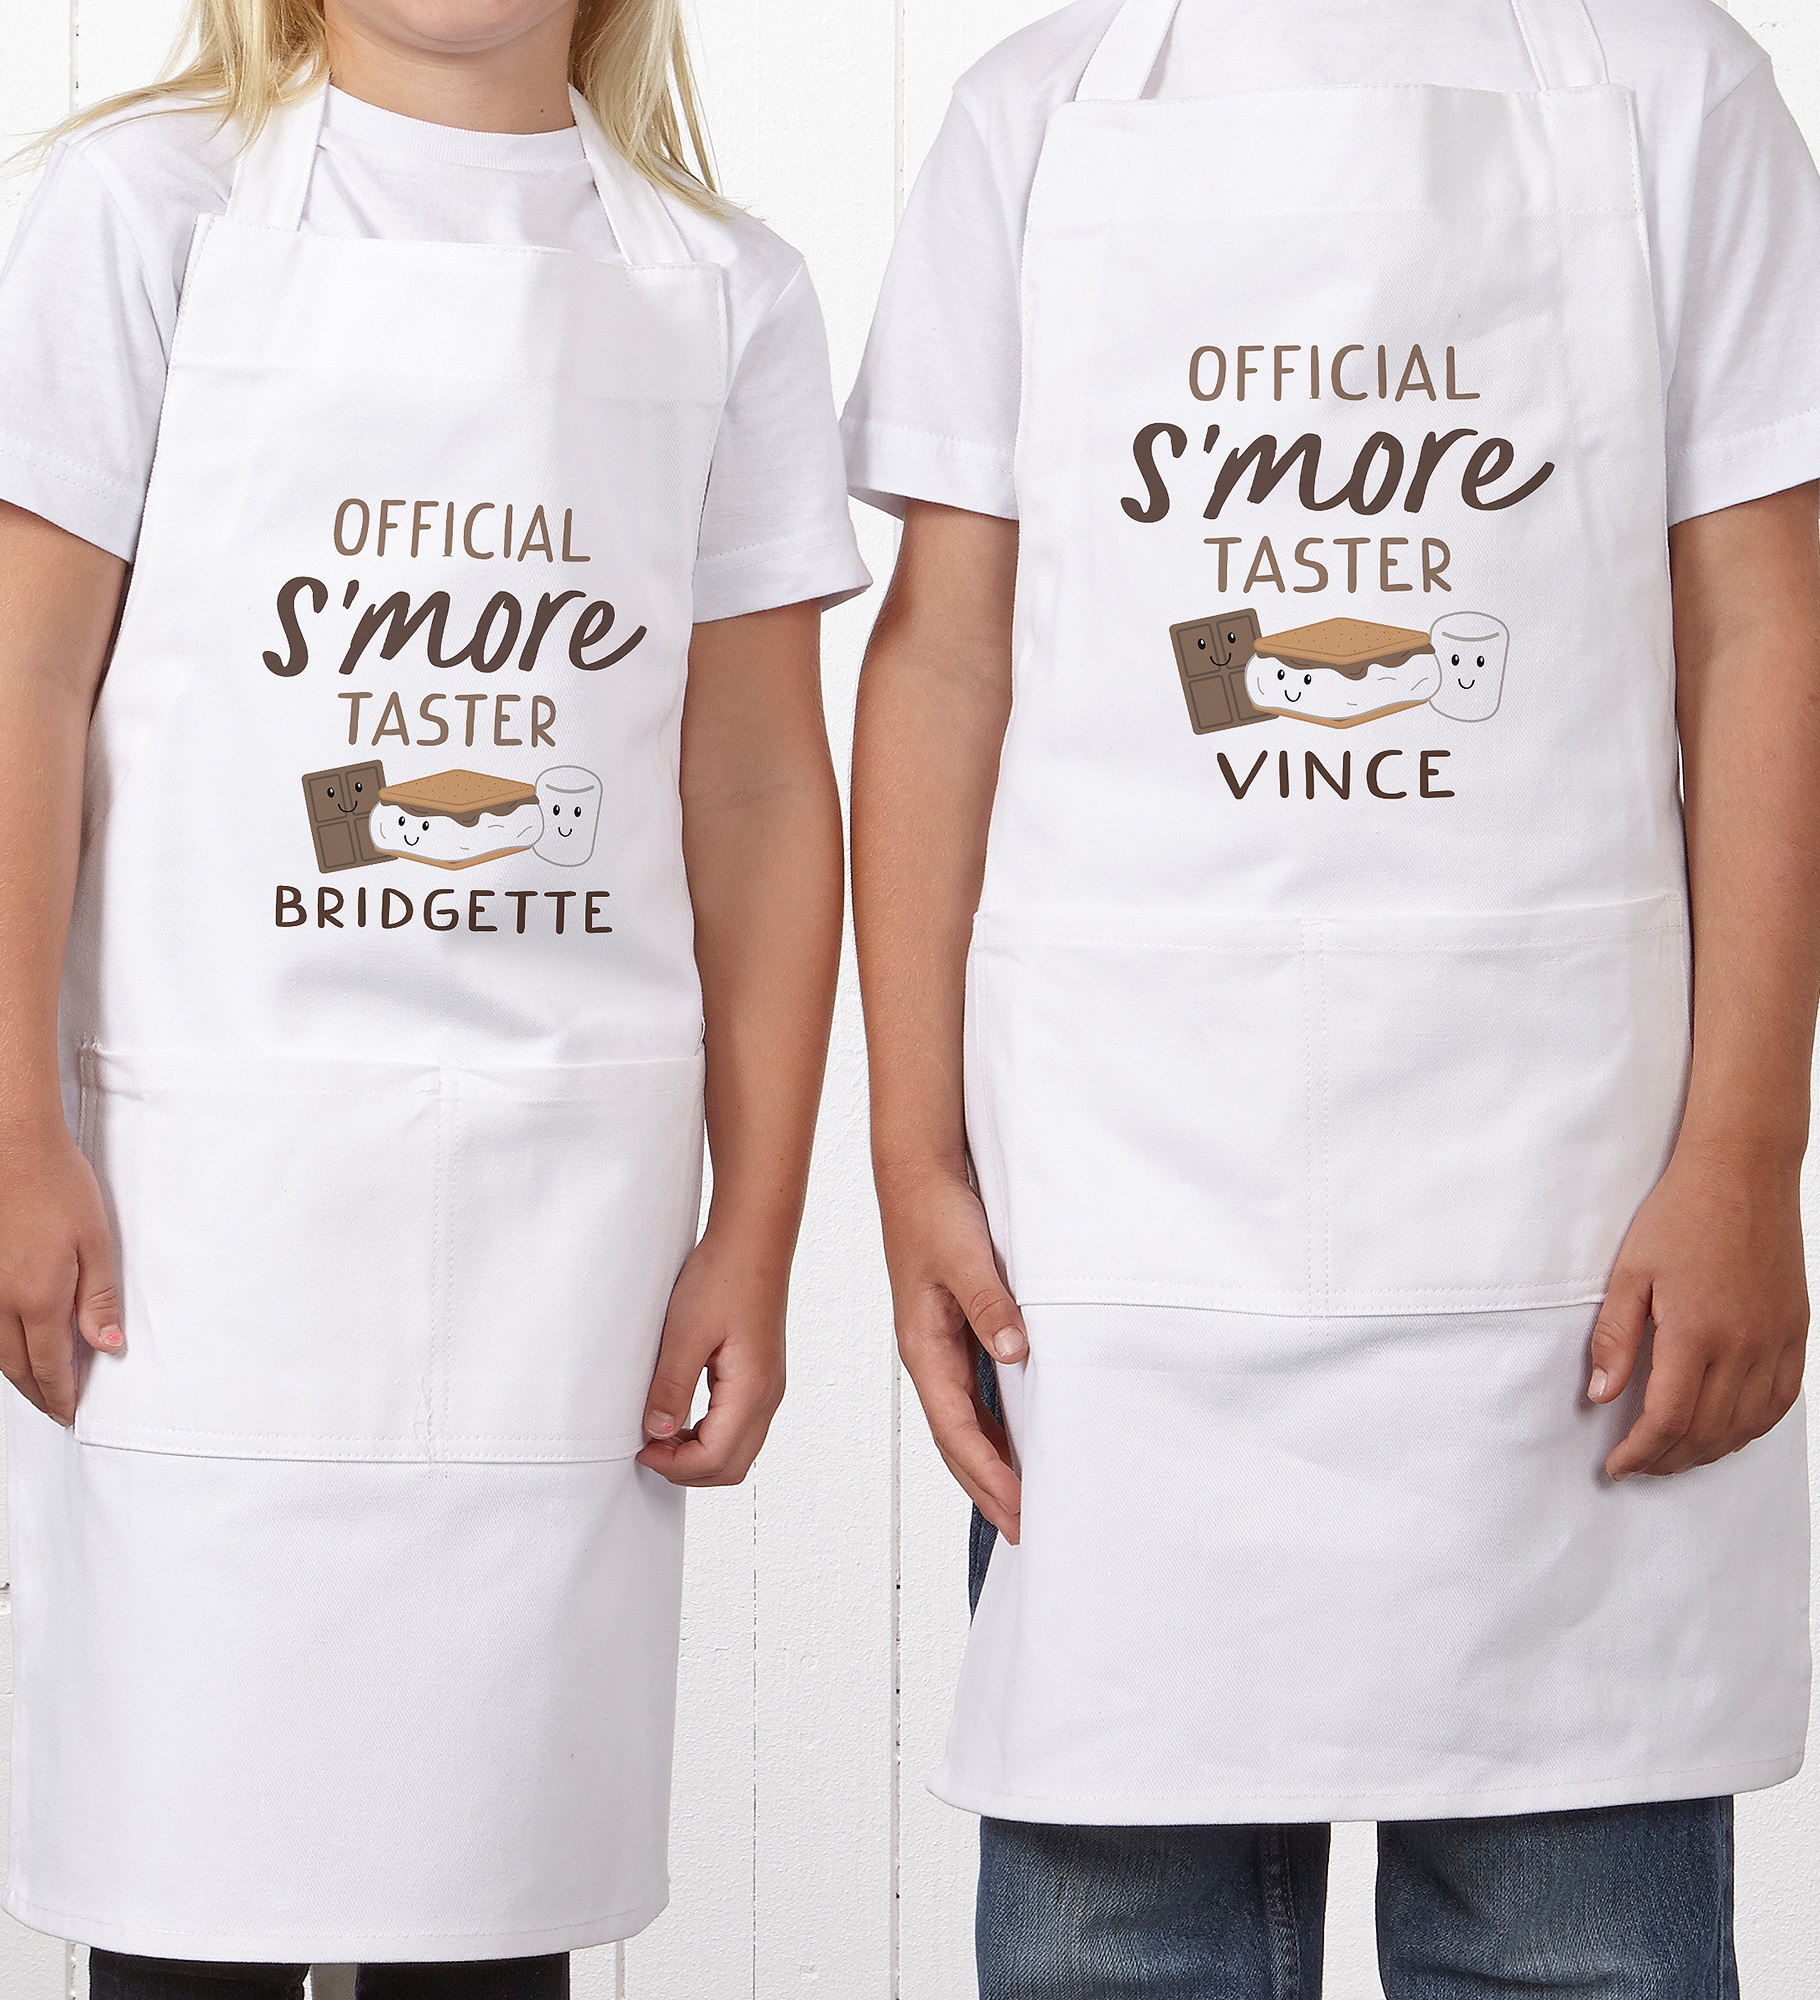 S'mores Personalized Youth Apron 